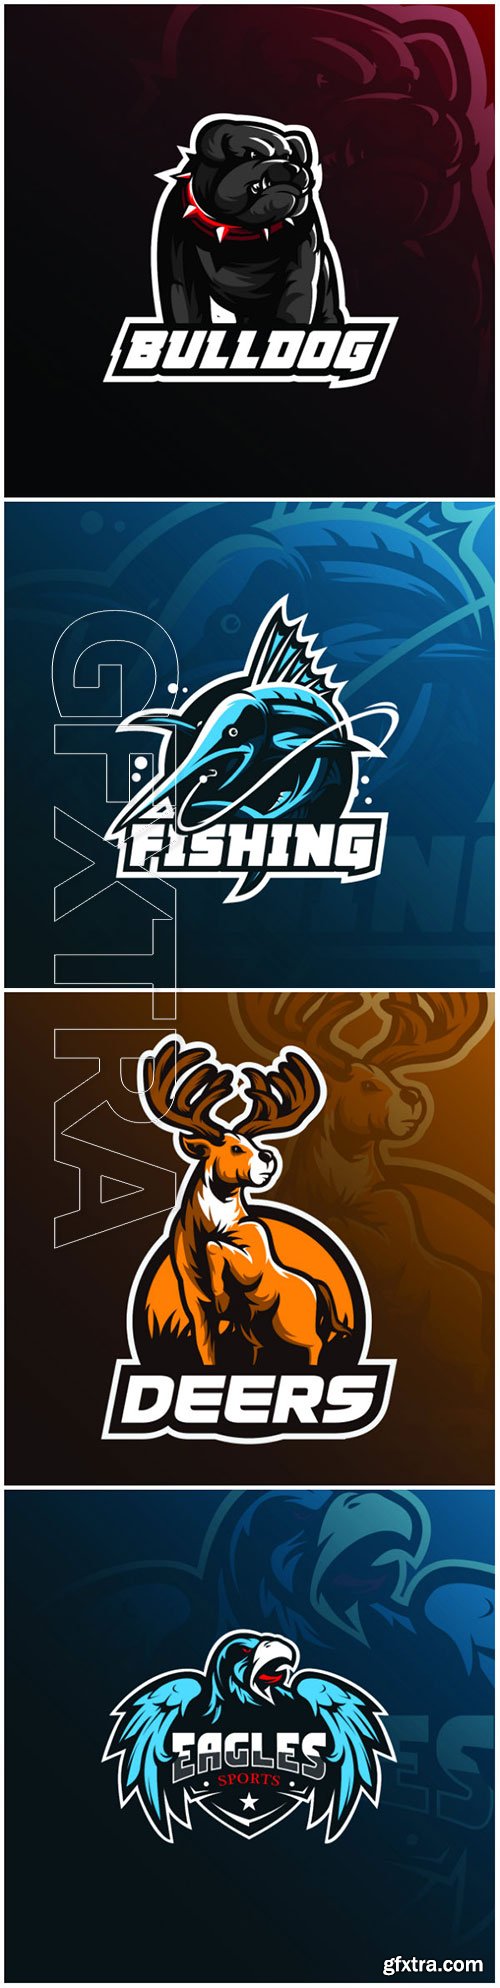 Mascot vector logo design with modern illustration concept style for badge, emblem and tshirt printing #3